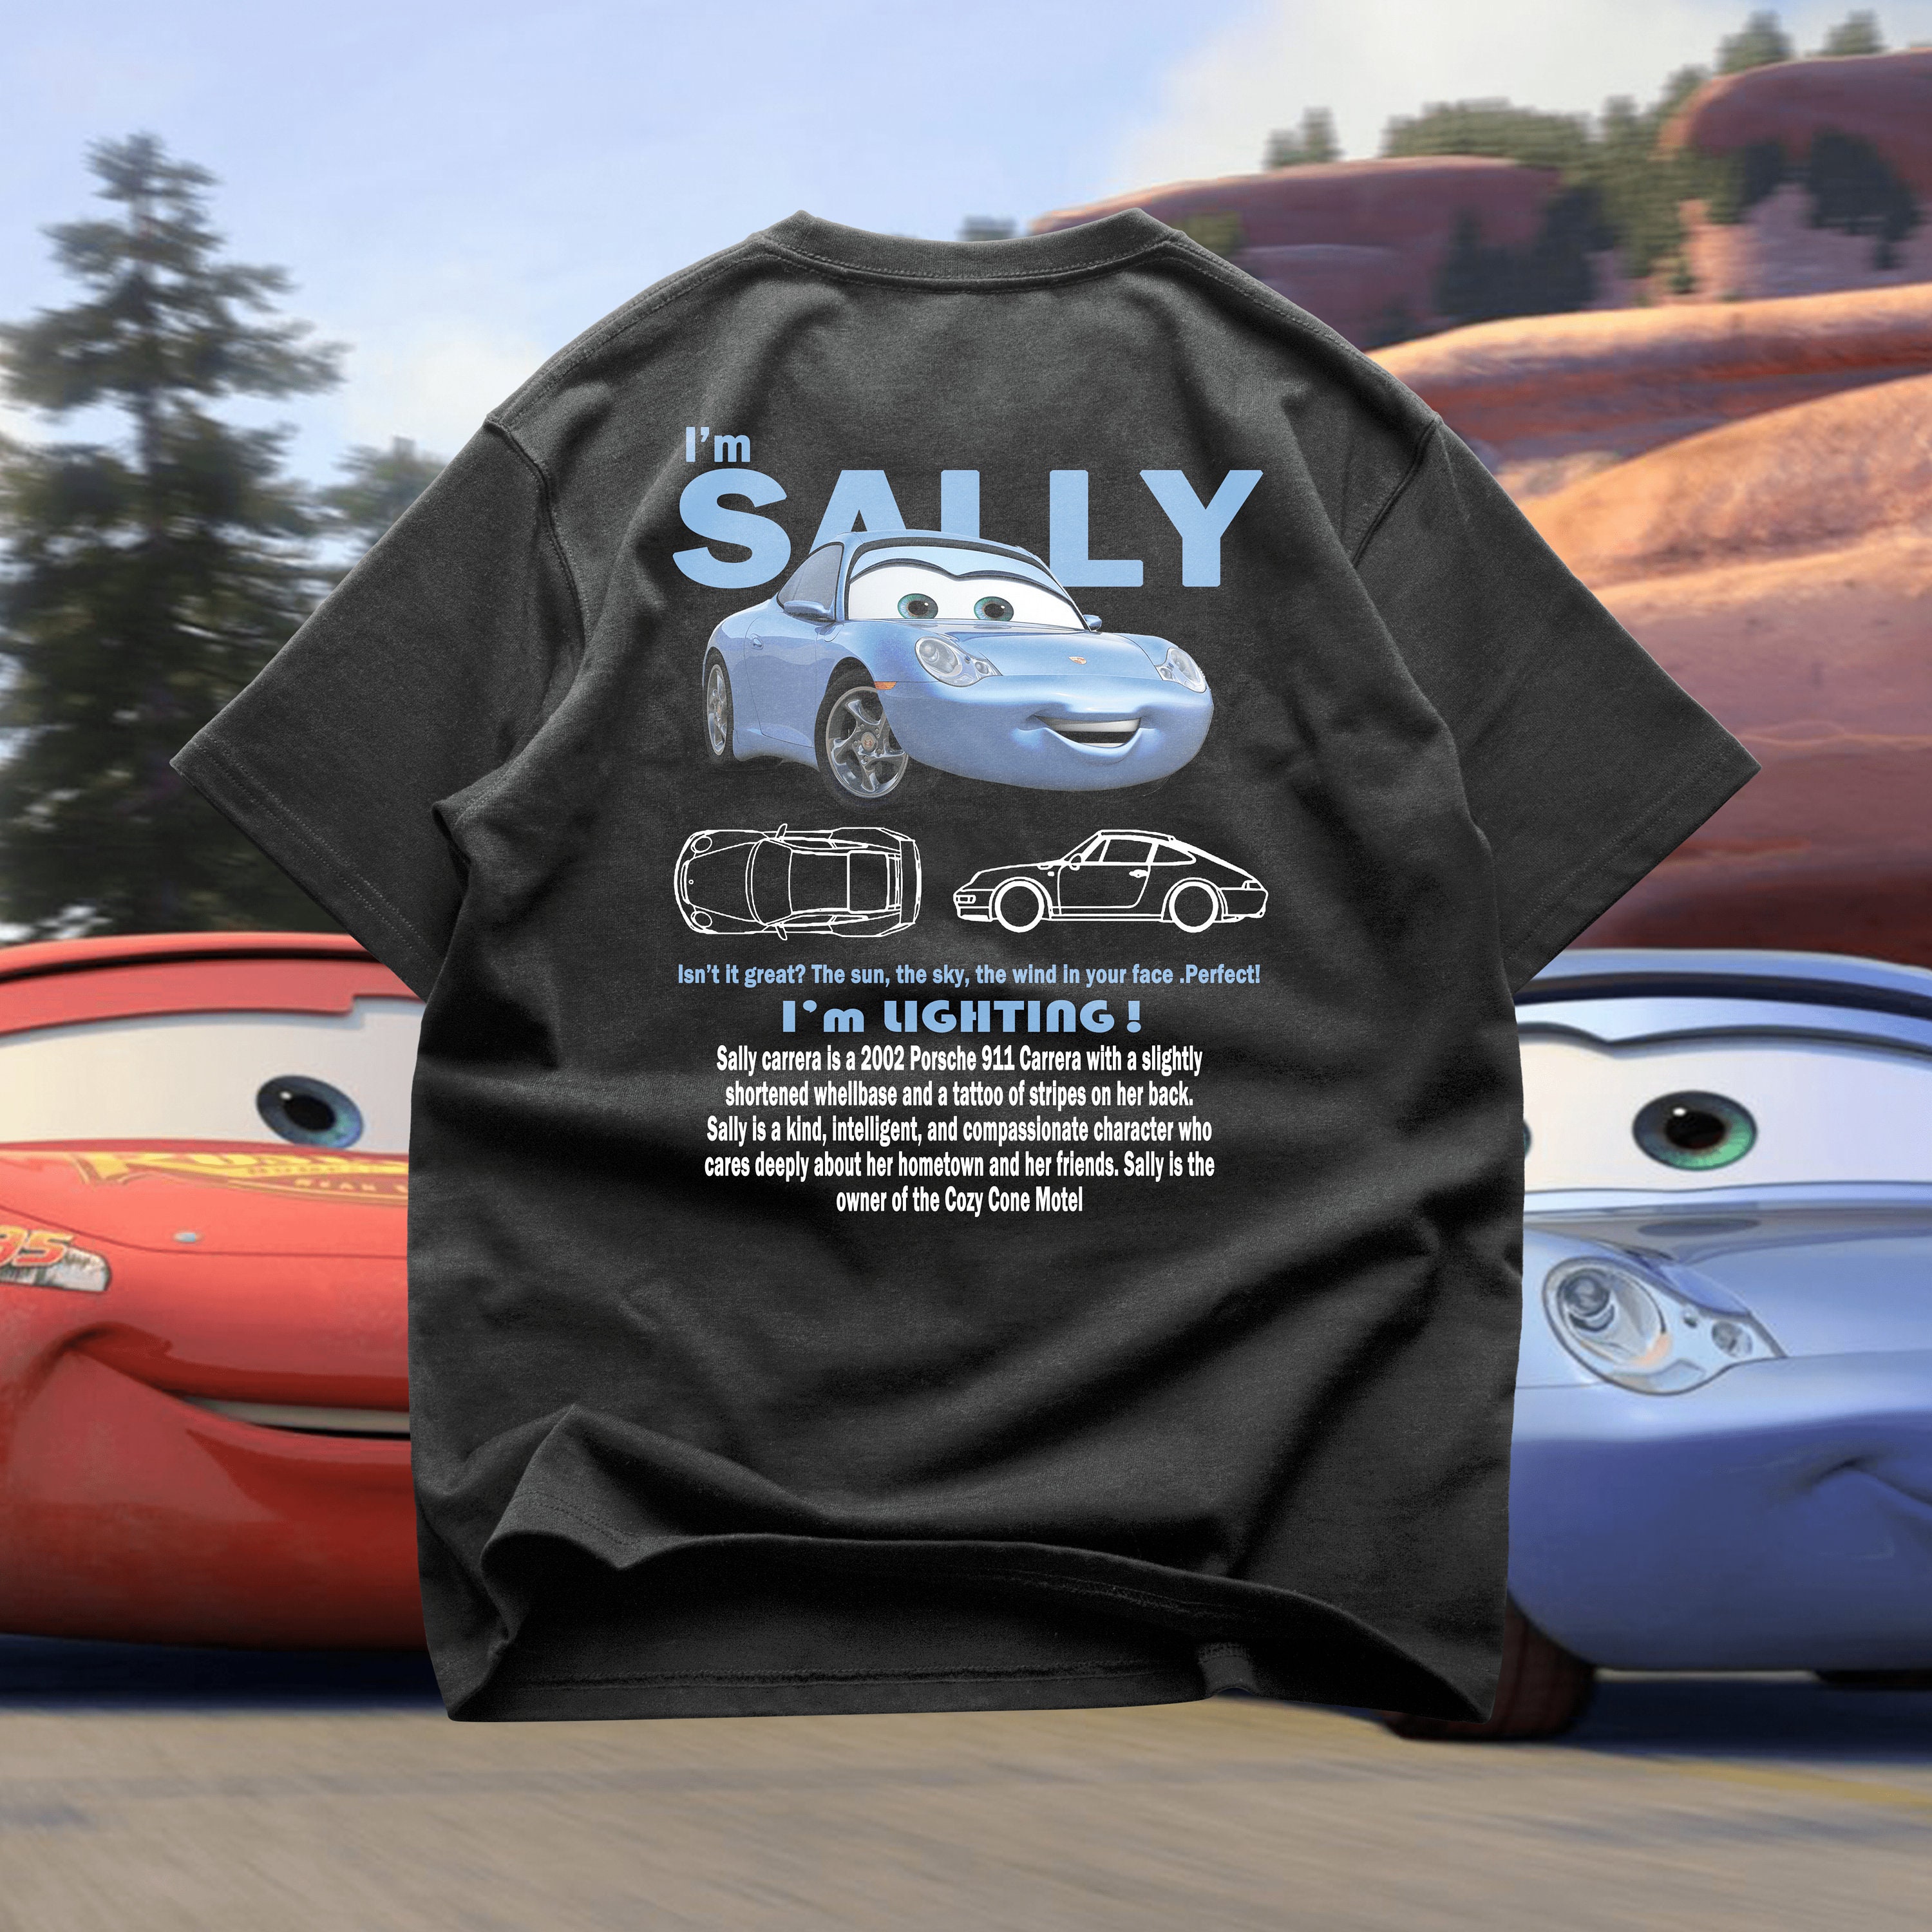 Cars Official Character Clothing